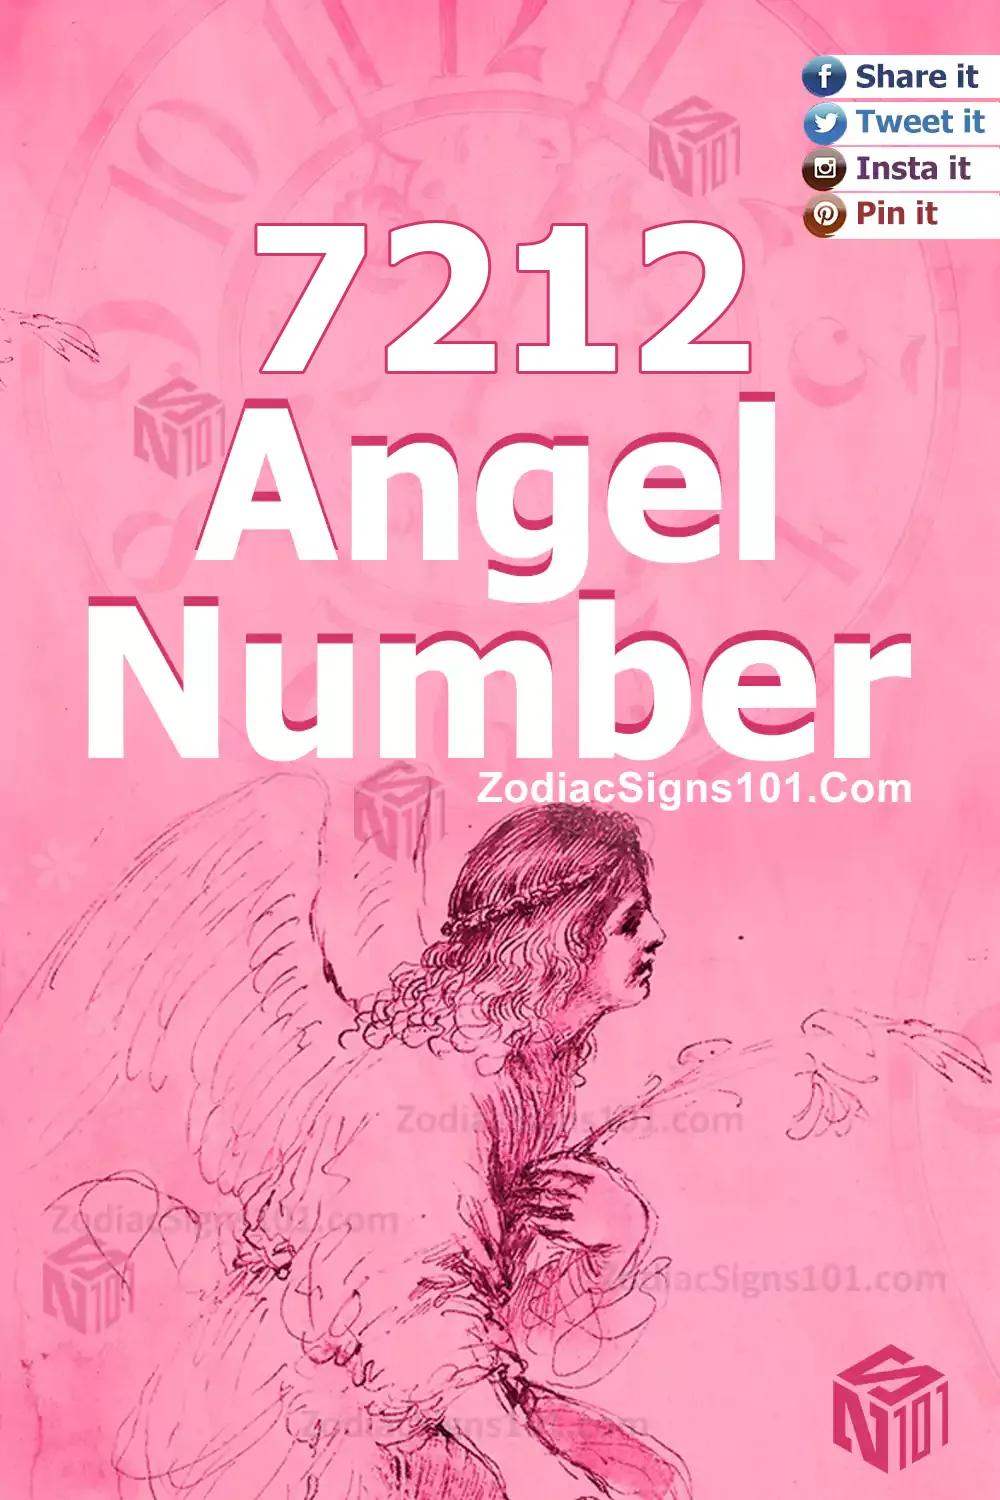 7212 Angel Number Meaning